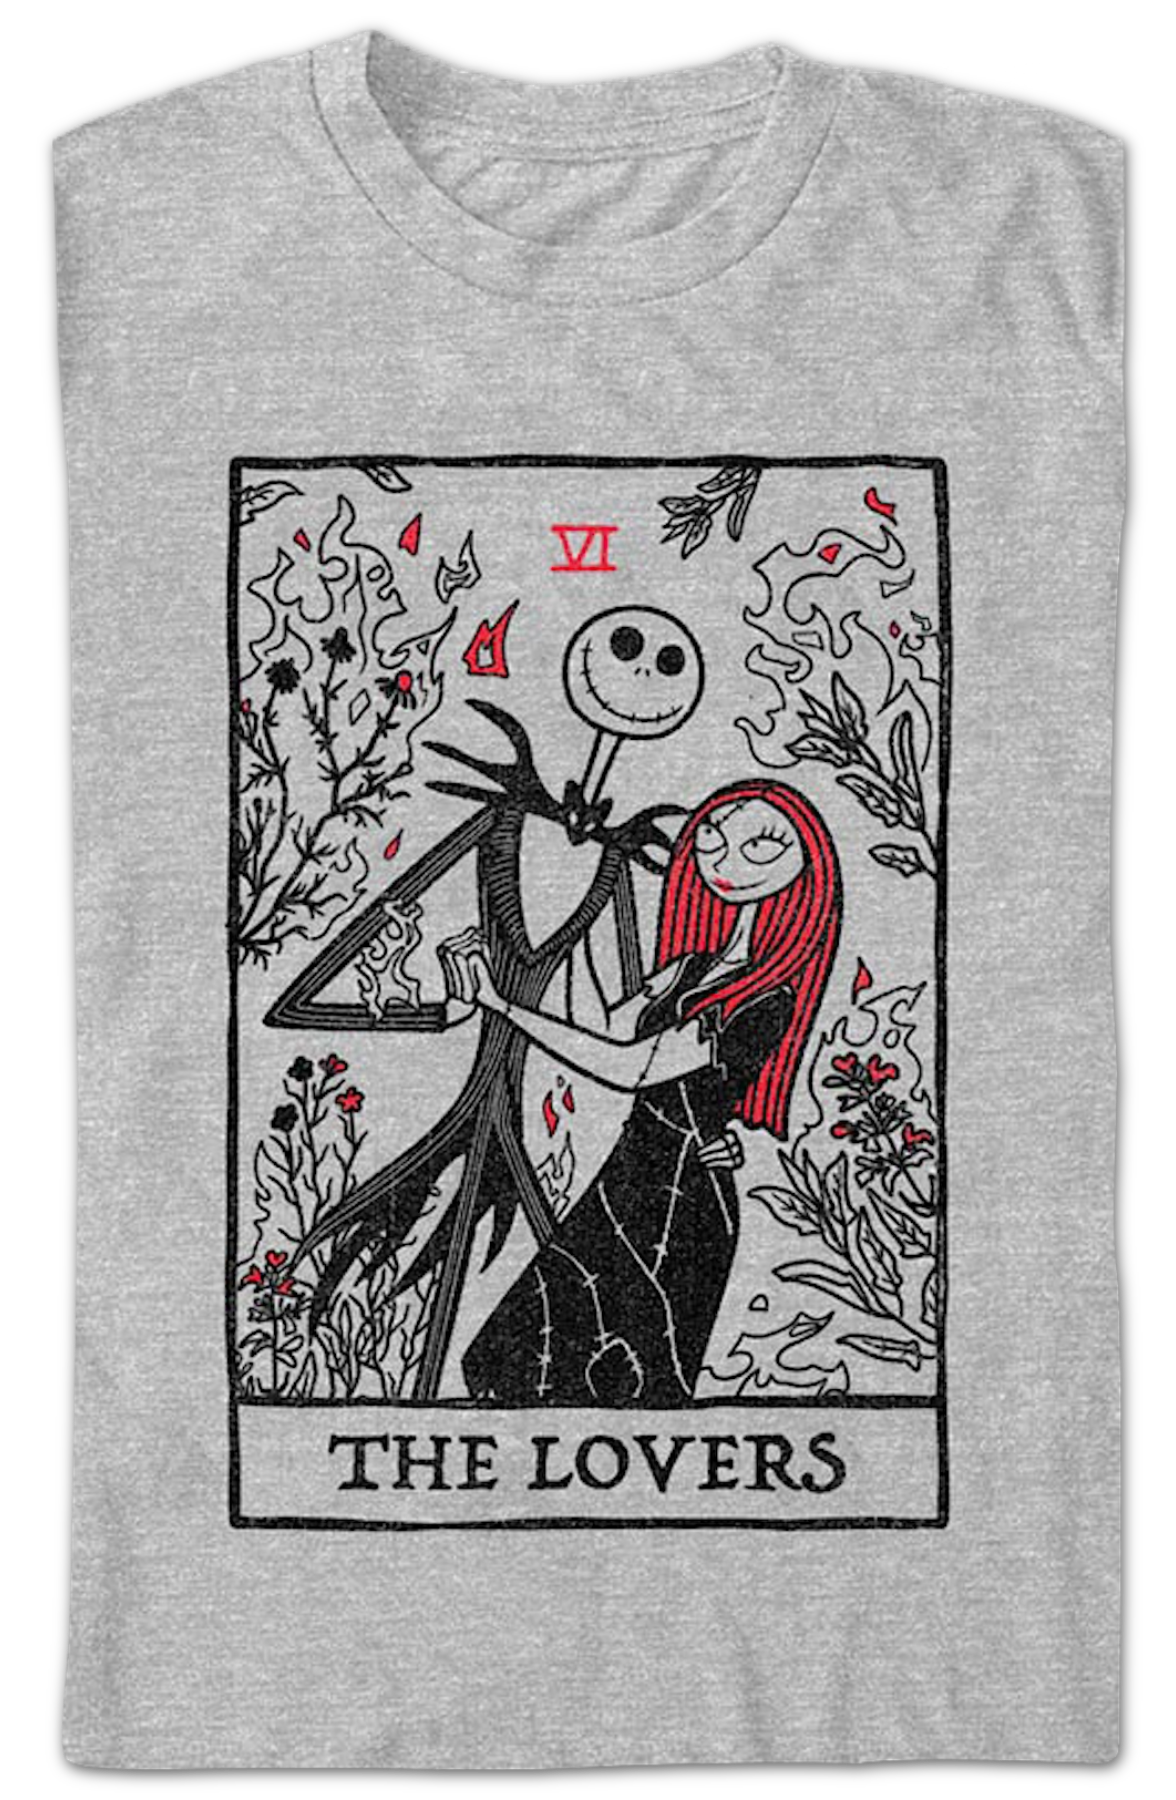 The Lovers Tarot Card Nightmare Before Christmas T-Shirt